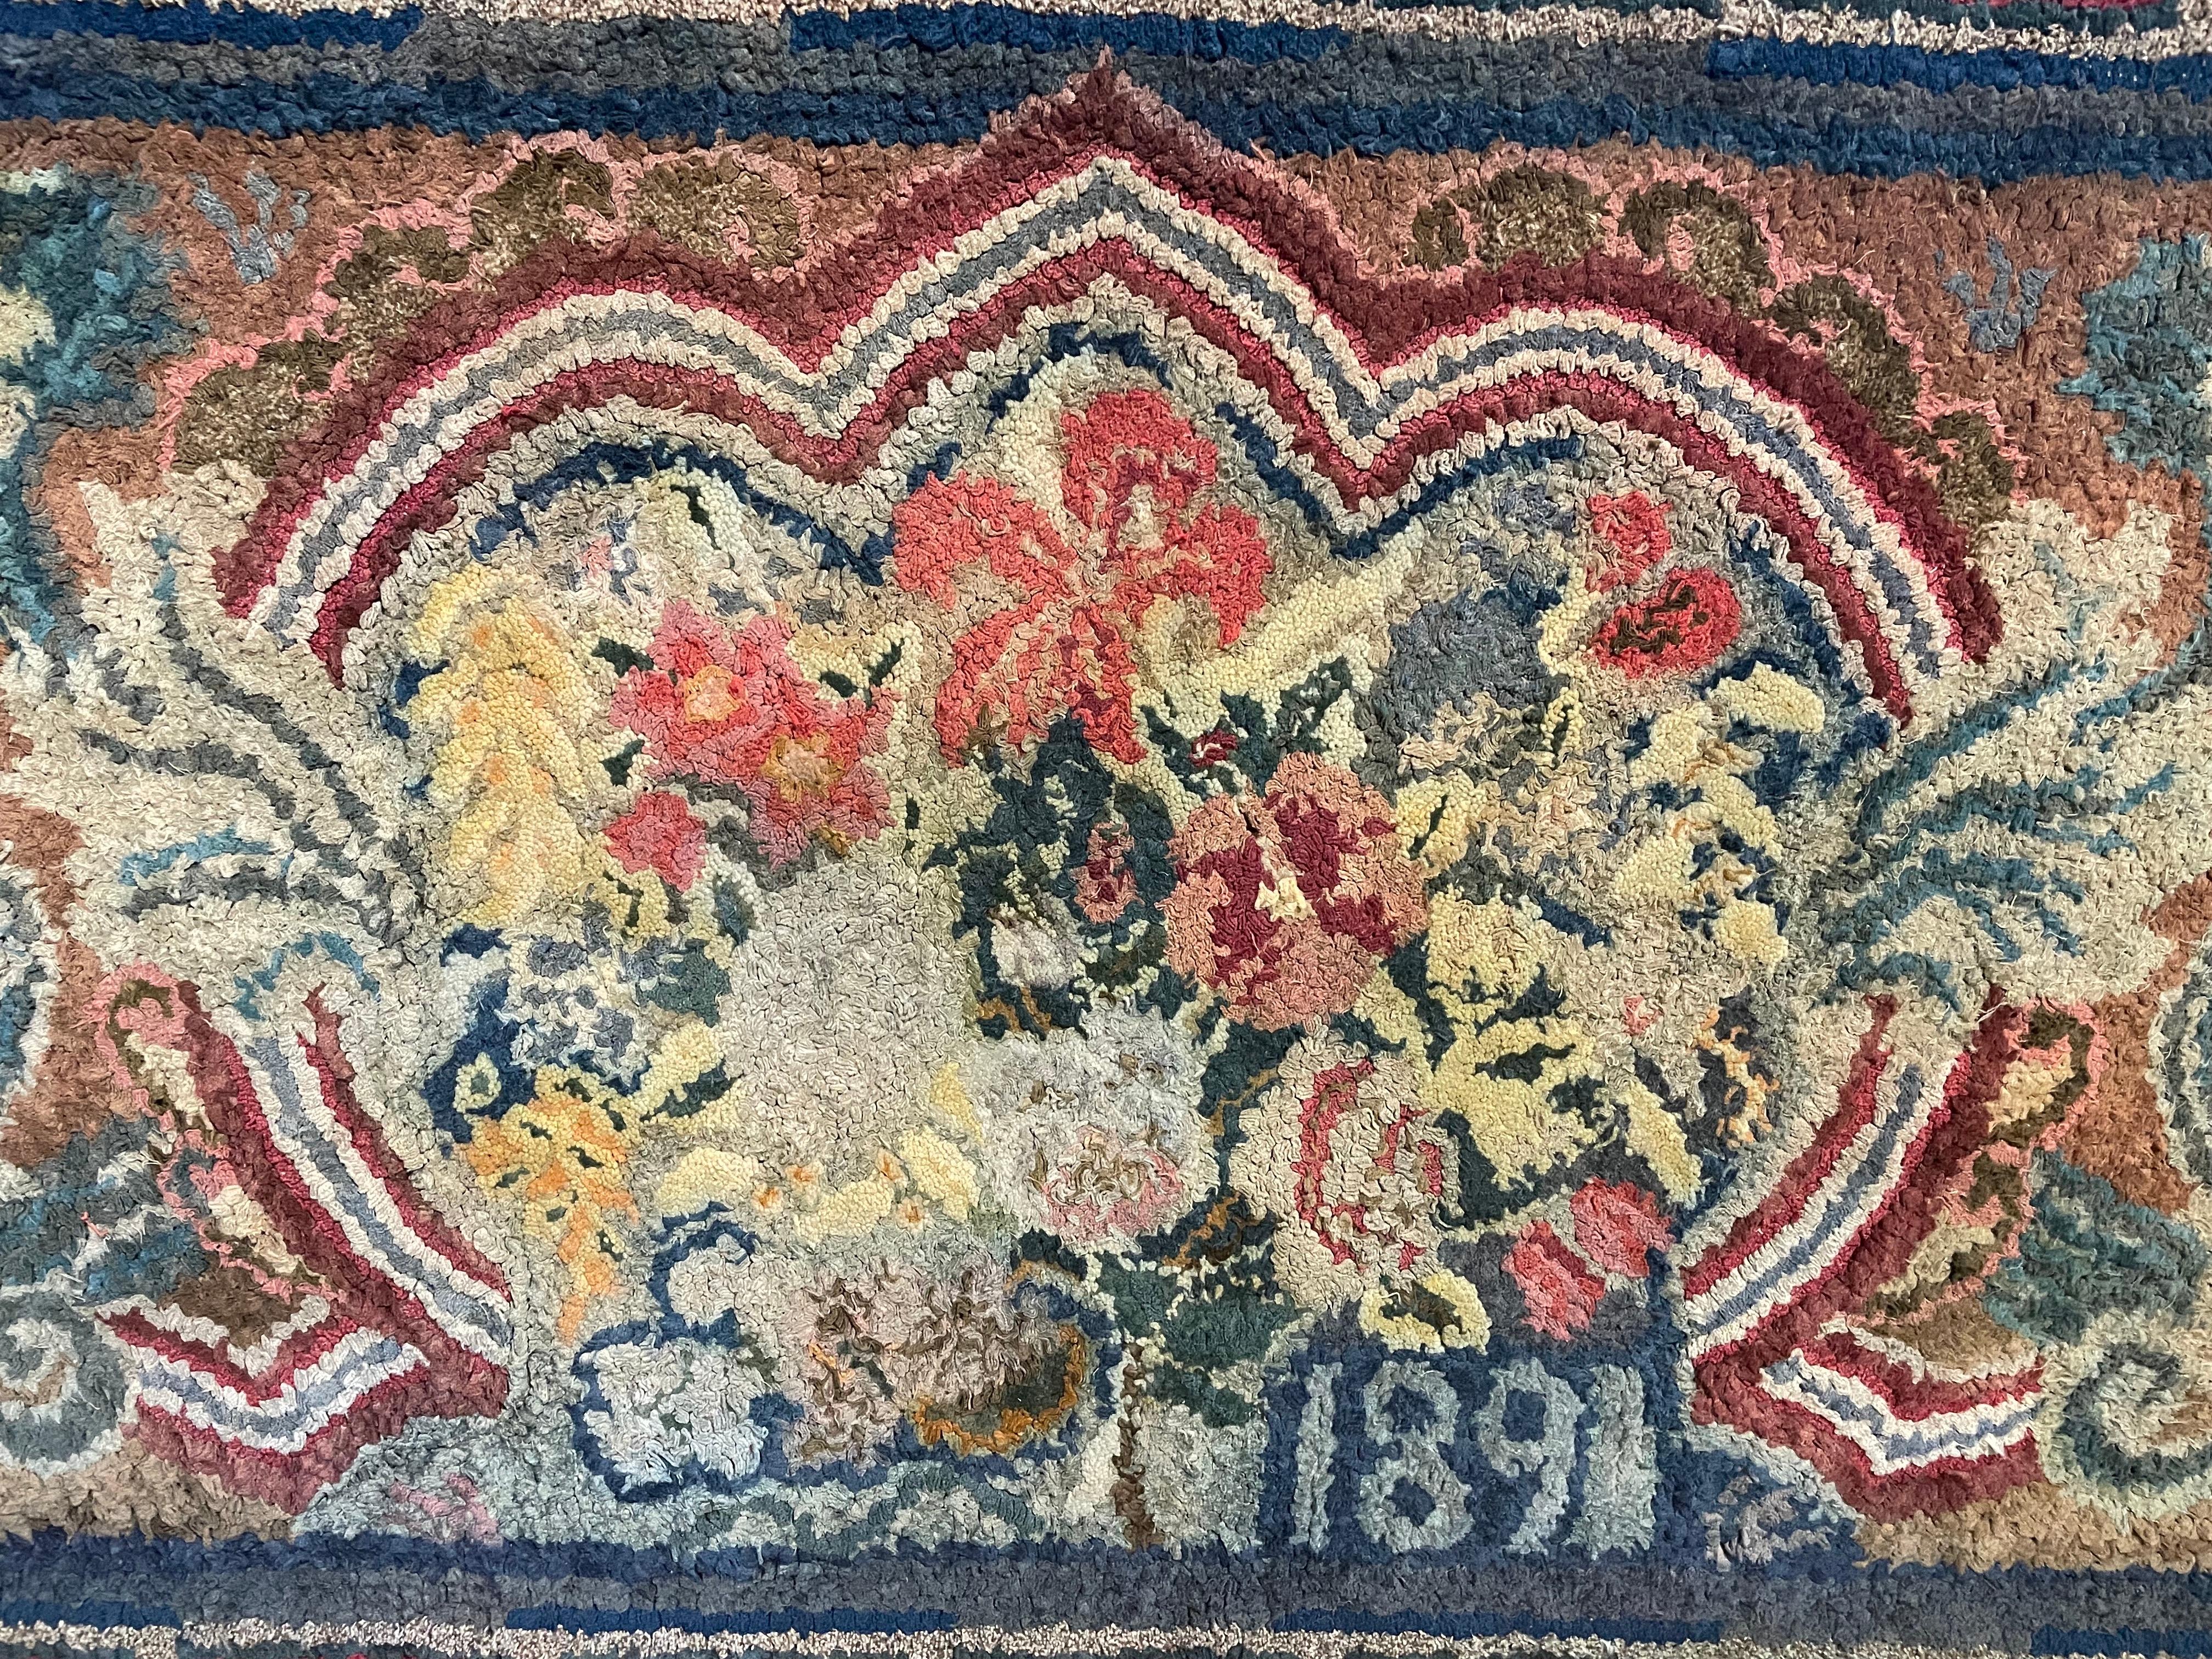 Lovely 19th century hooked rug with black braided border surrounding rug with vibrant red and teal highlighted Greek key border. Inset blue striped border around central floral medallion outlined by a striped arch and flanked by leafy arabesques.